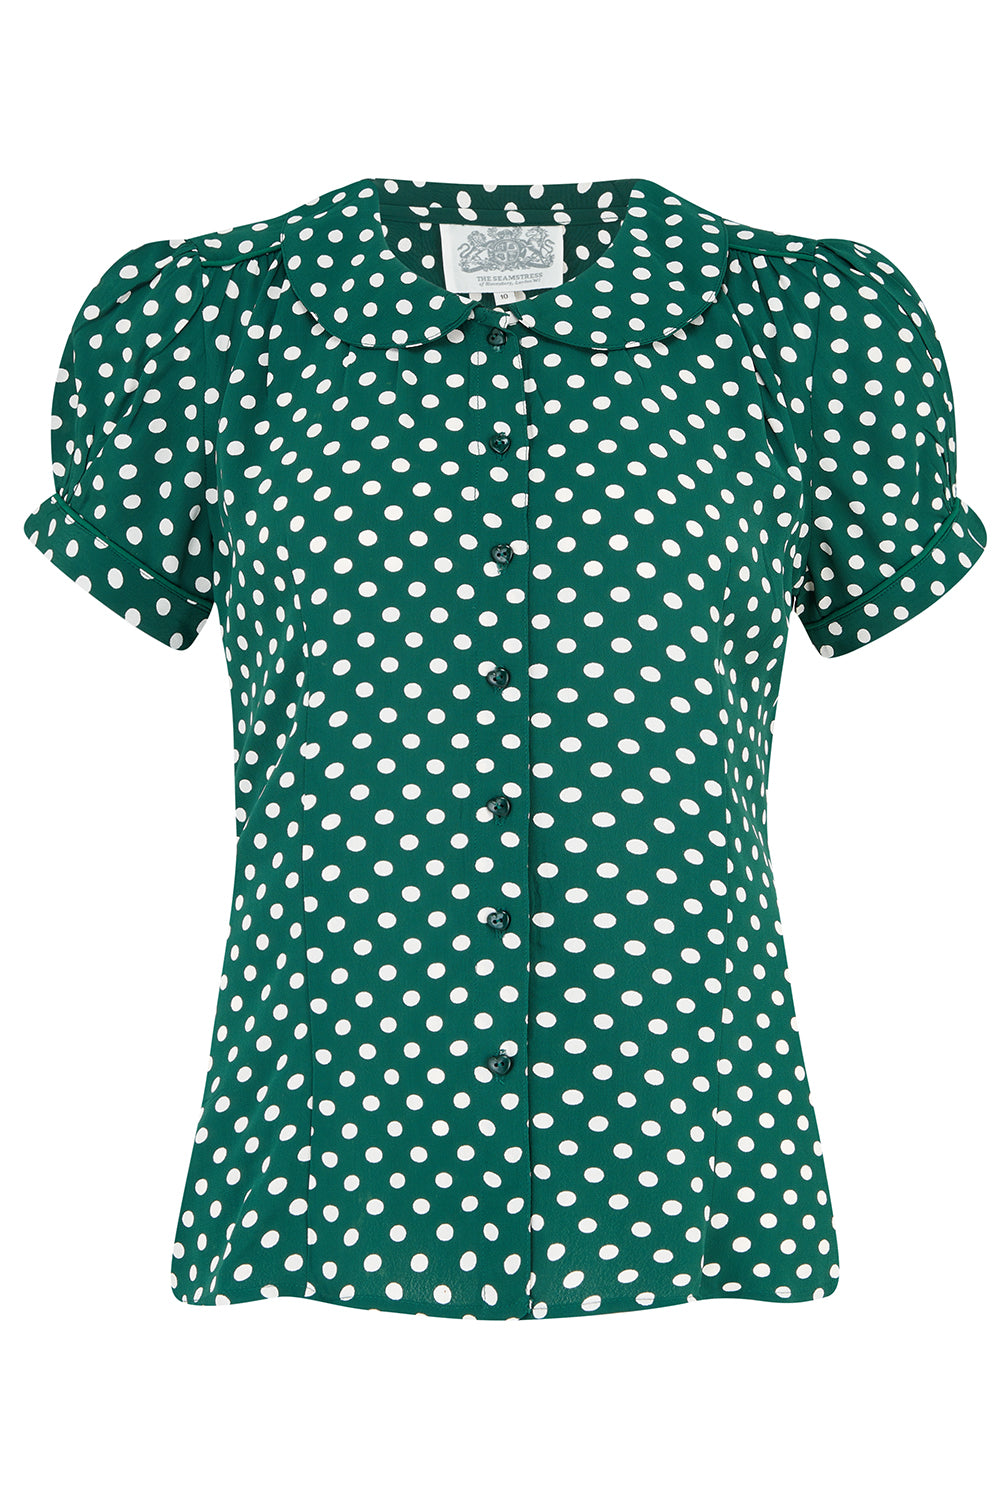 "Jive" Short Sleeve Blouse in Green With Polka Dot Spot, Classic 1940s Vintage Style